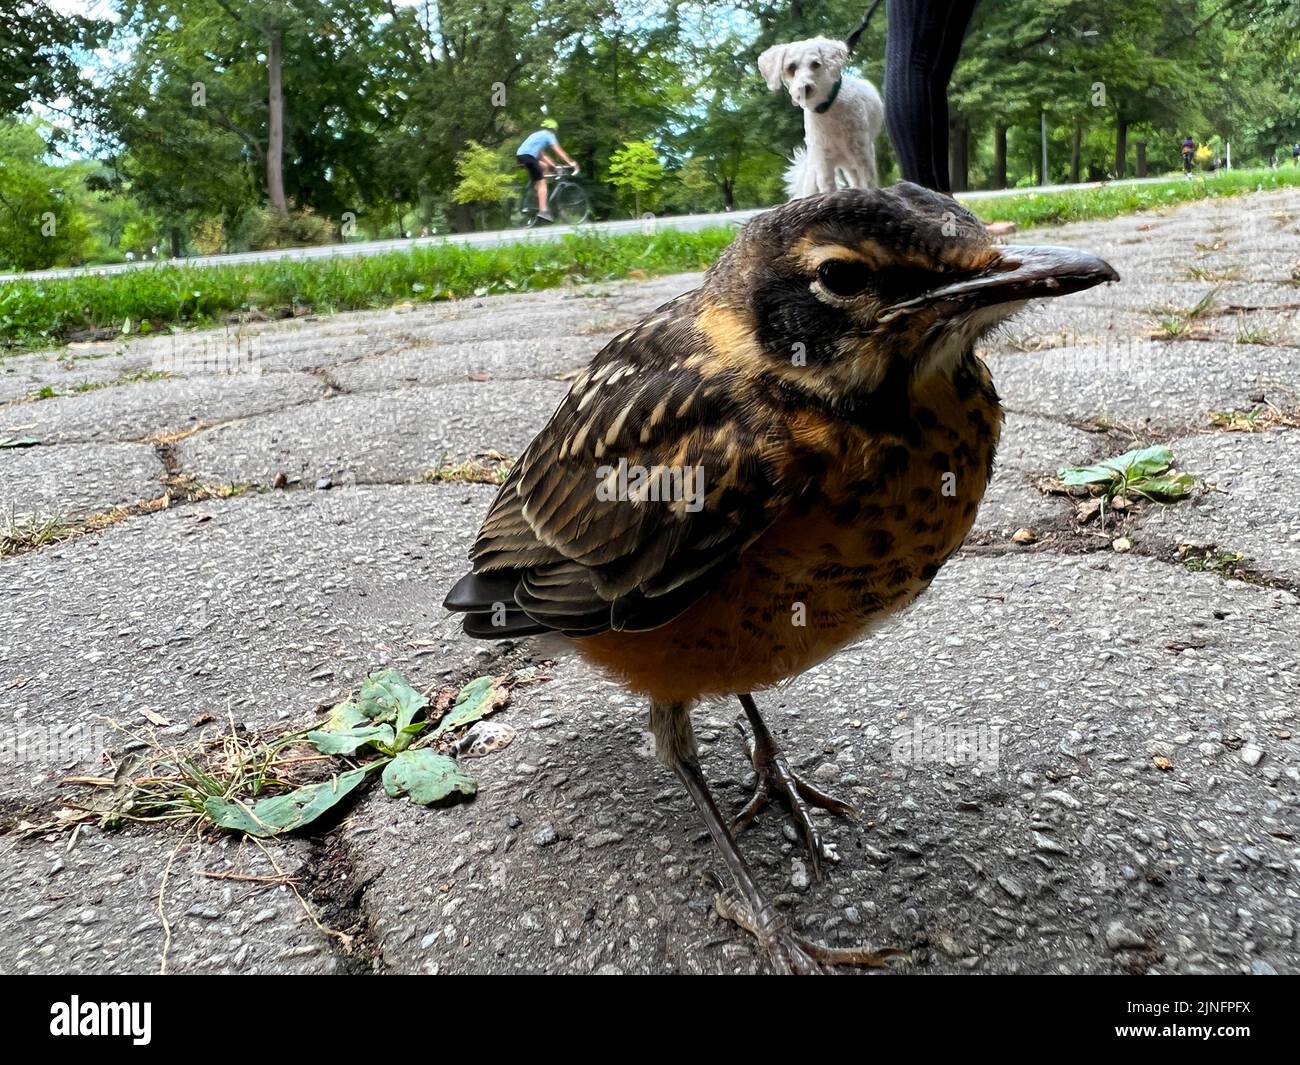 Baby Robin essere check out comprare un cane in background. Prospect Park, Brooklyn, New York. Foto Stock